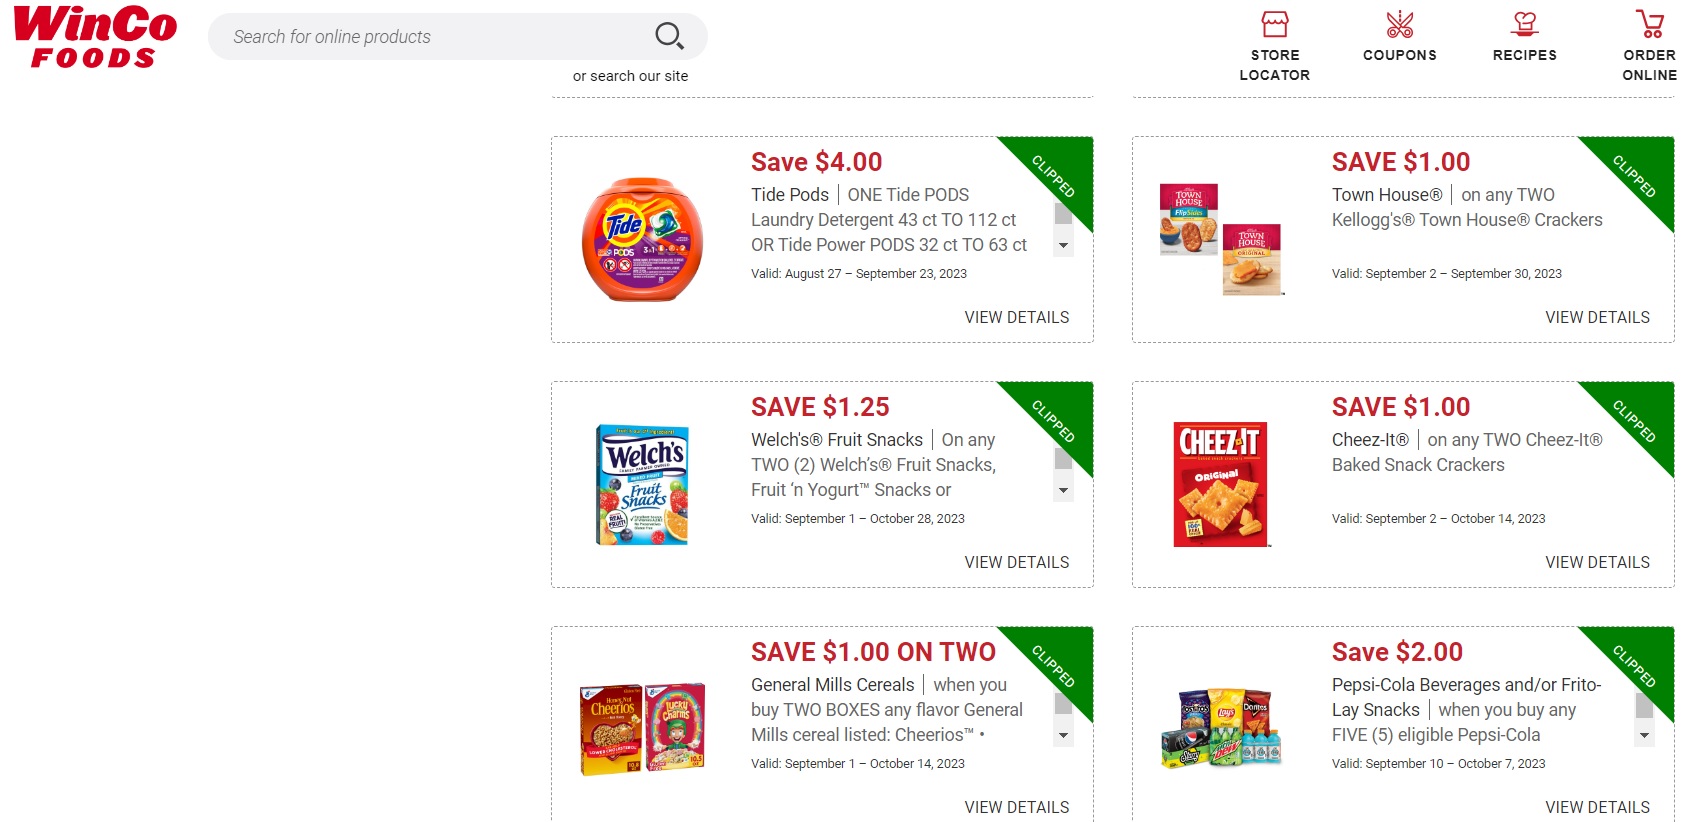 winco foods coupons